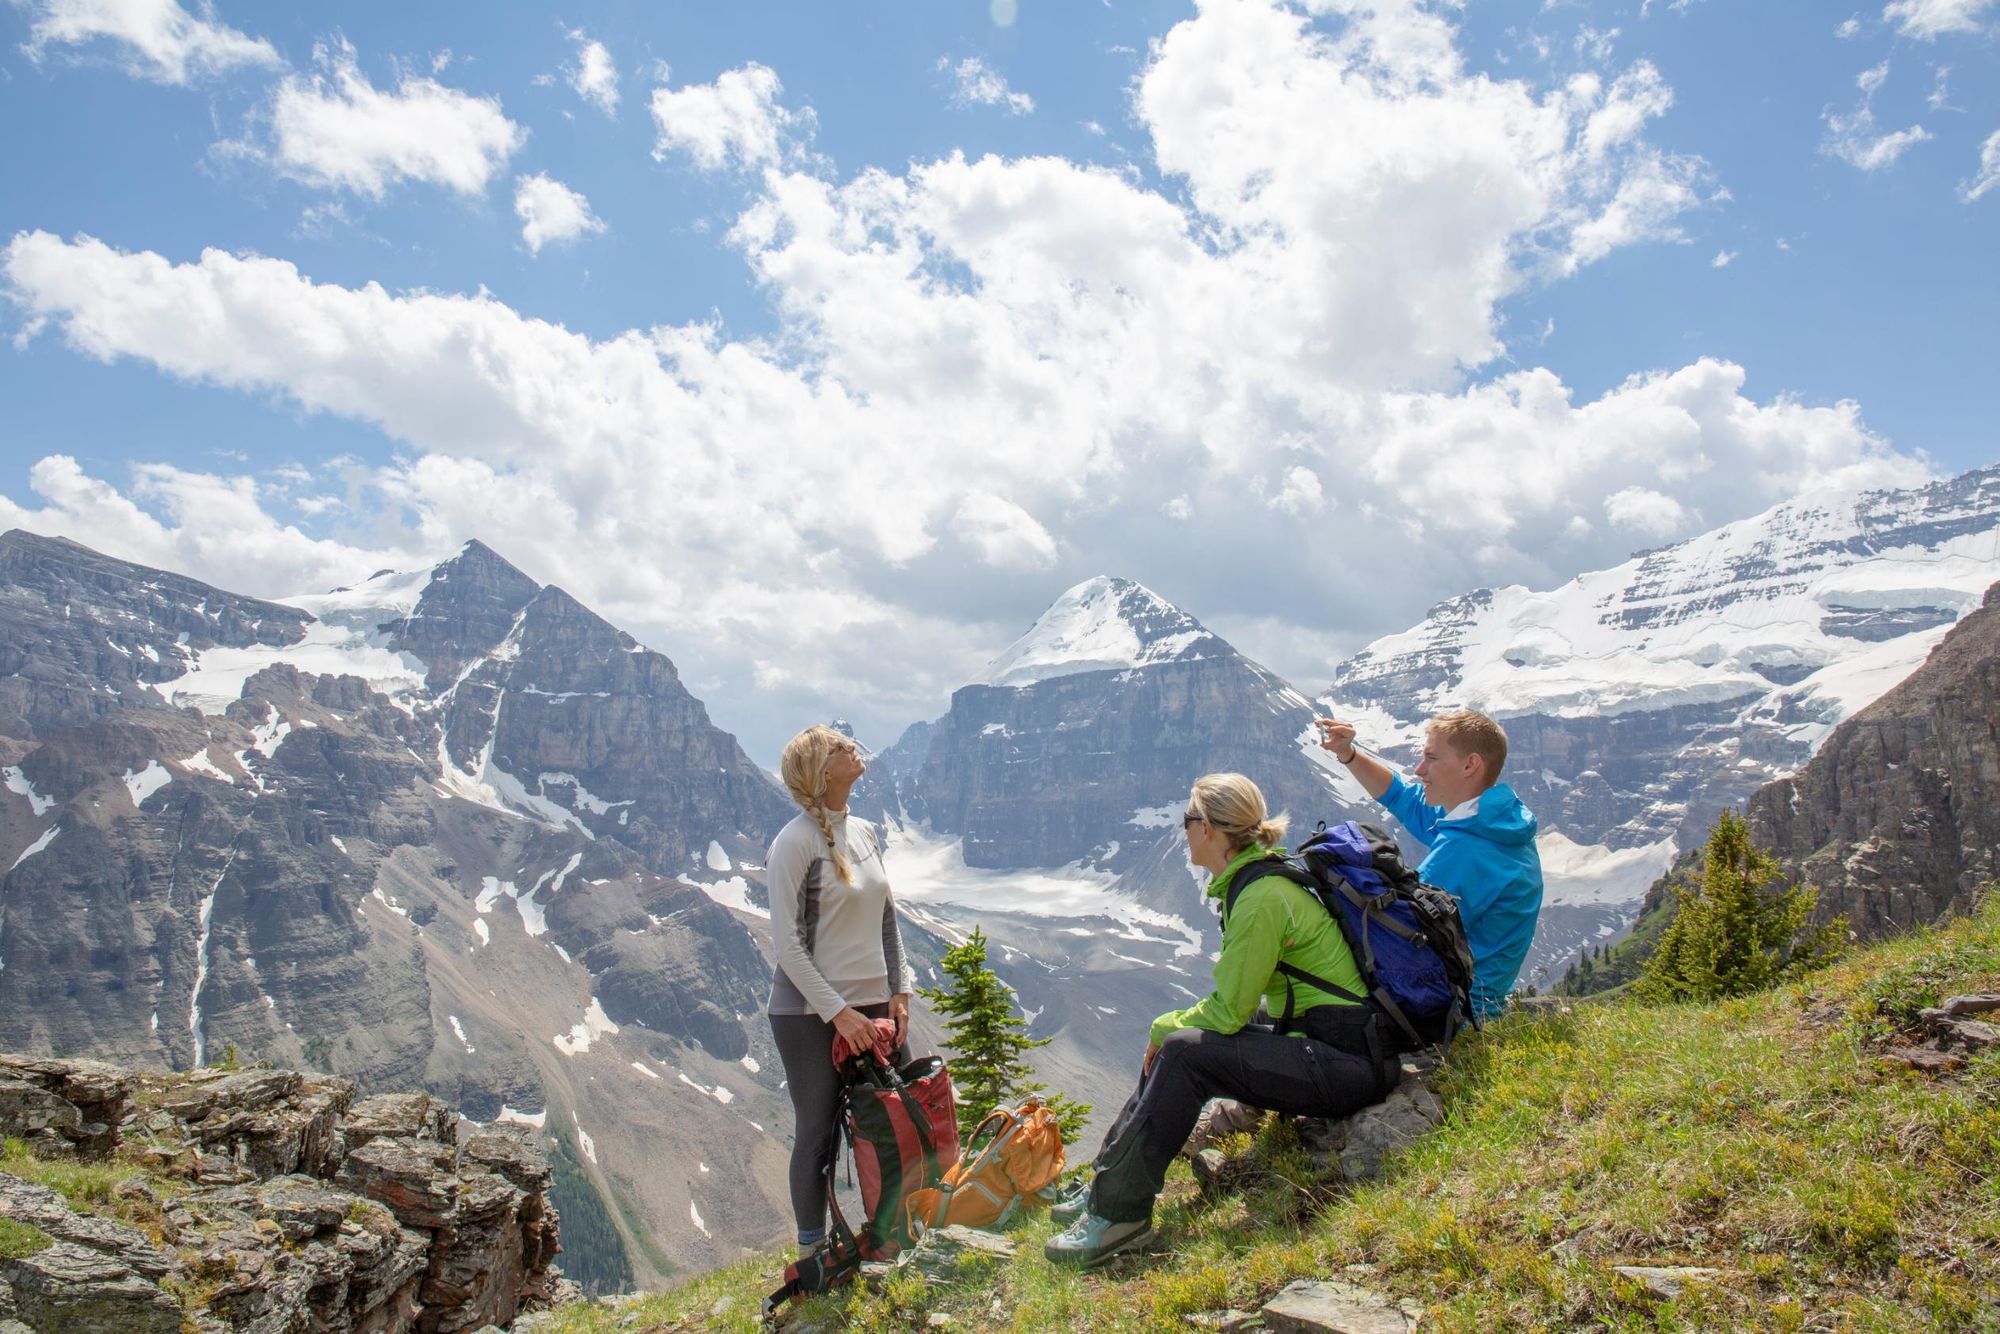 Stopping for a break on the Mount Fairview Summit Trail. Photo: Getty.